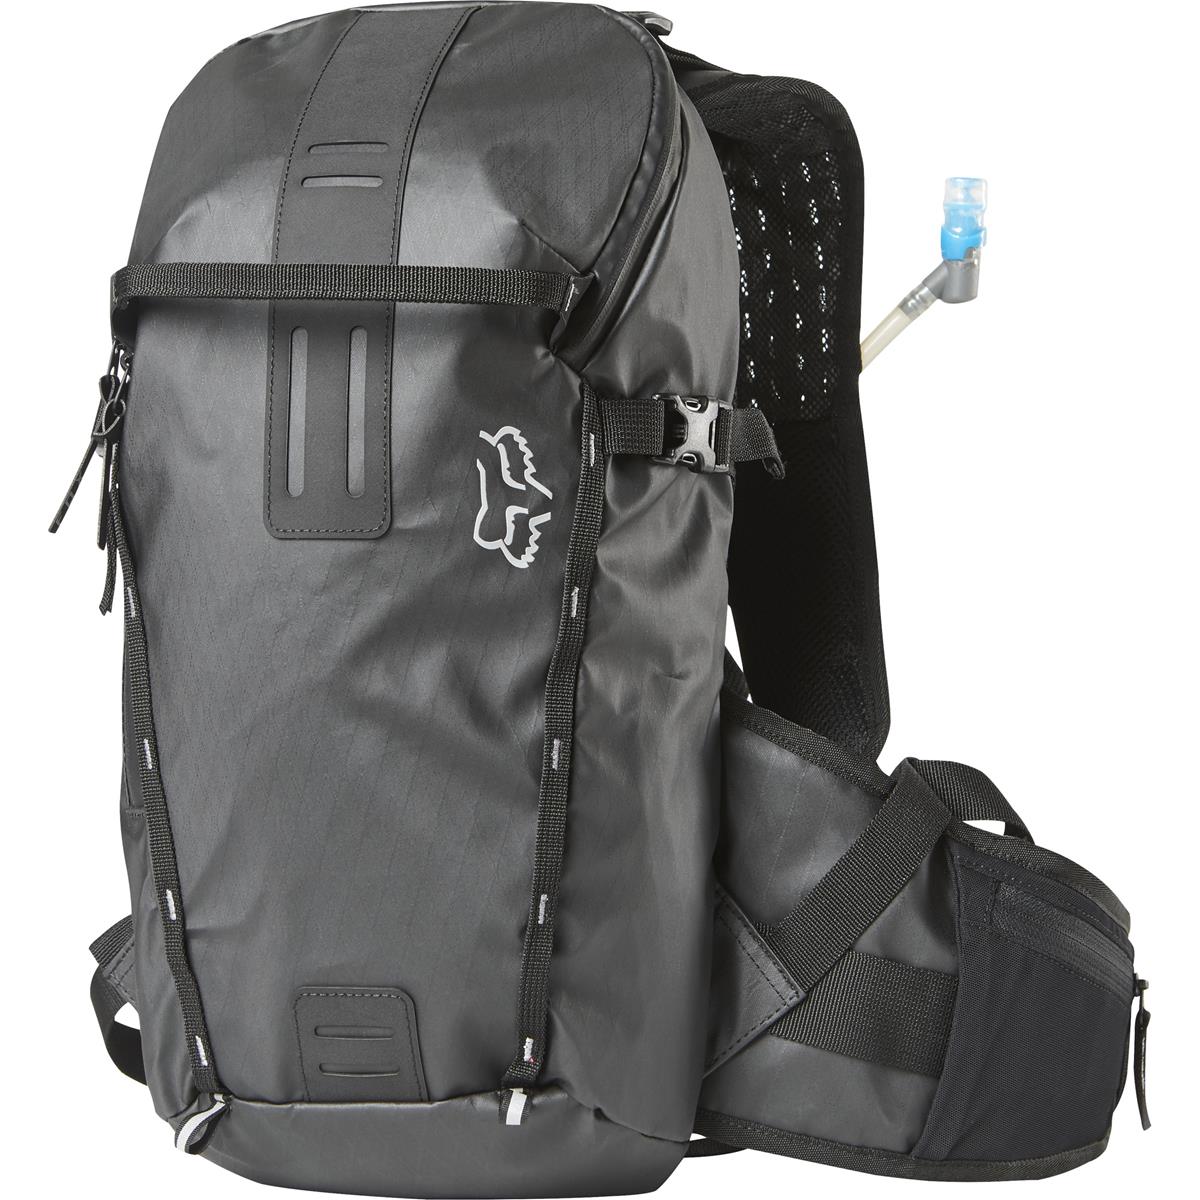 Fox Backpack with Hydration System Compartment Utility Hydration 11.6 L, Black